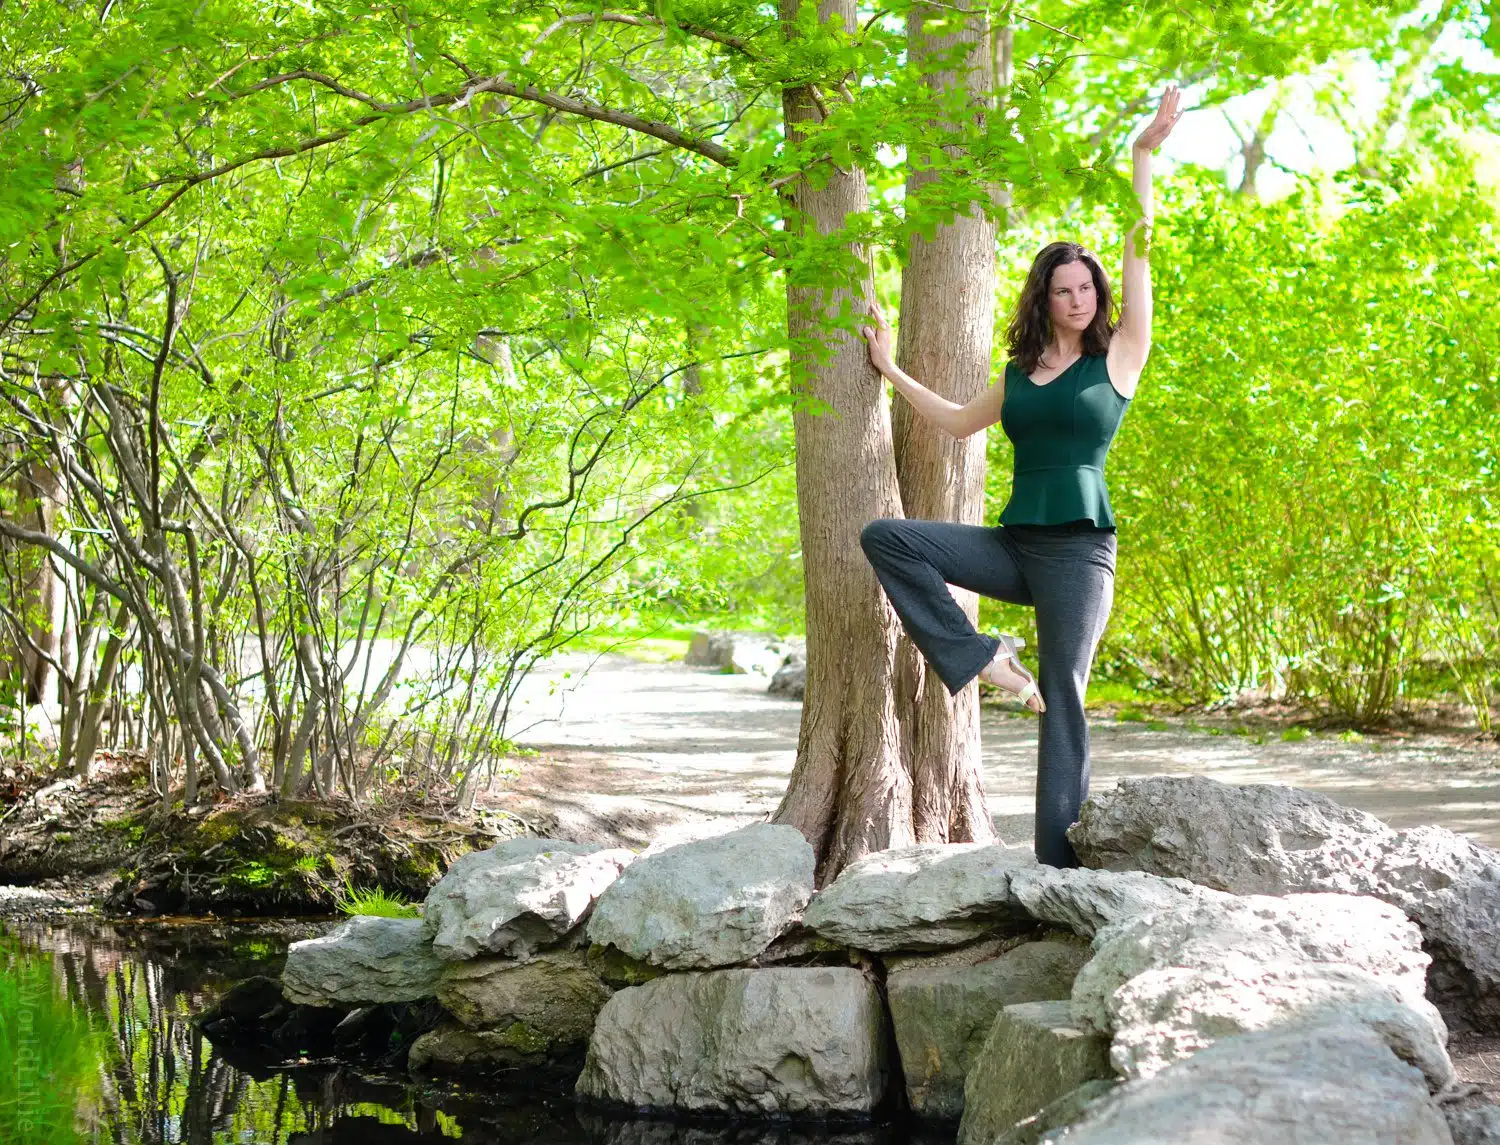 These dress pants are also yoga pants! Perfect for randomly poses by the side of a river.